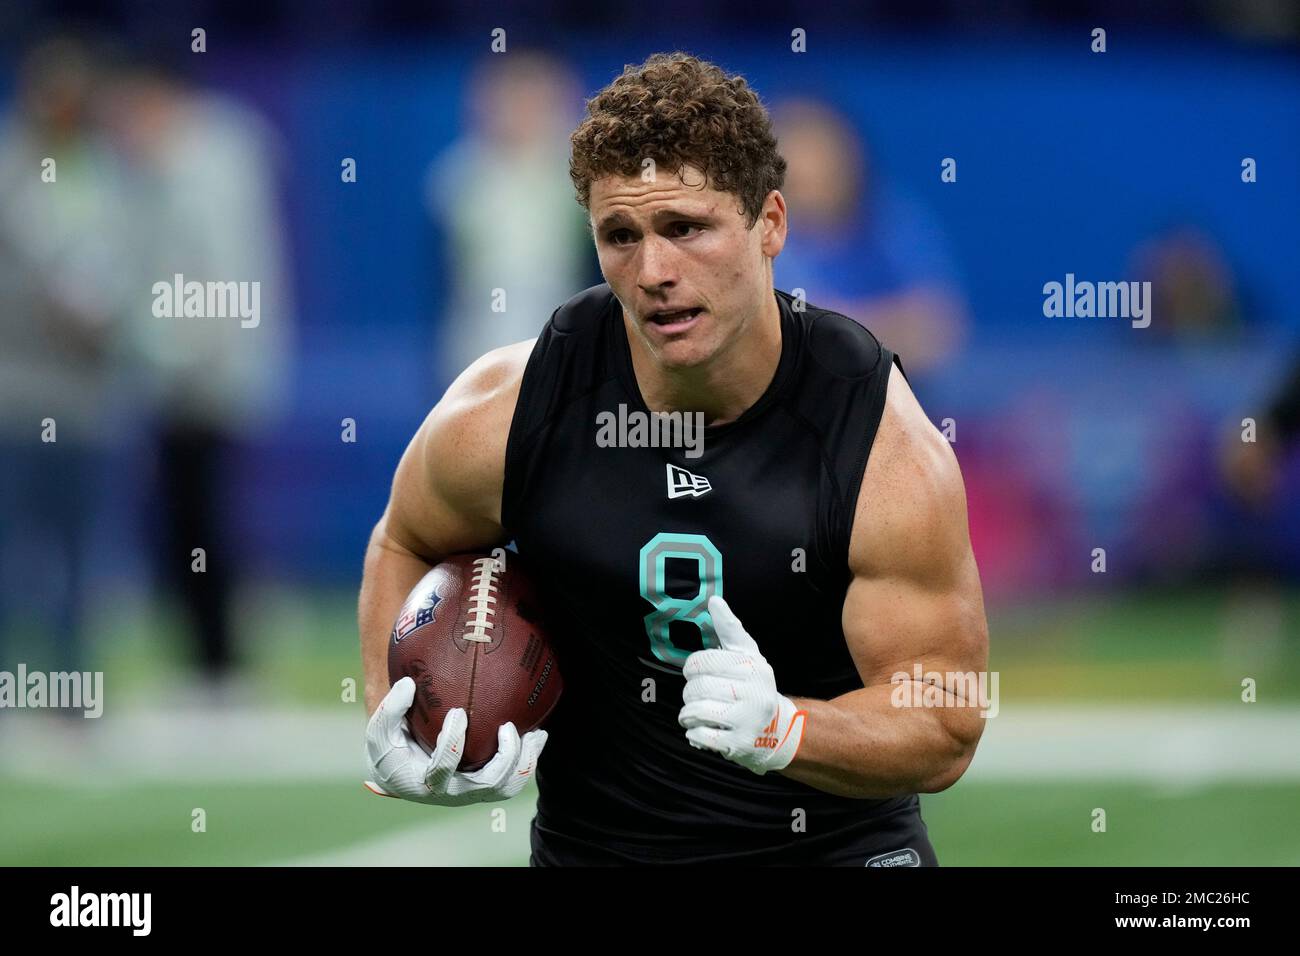 2022 NFL Scouting Combine Preview: Linebacker